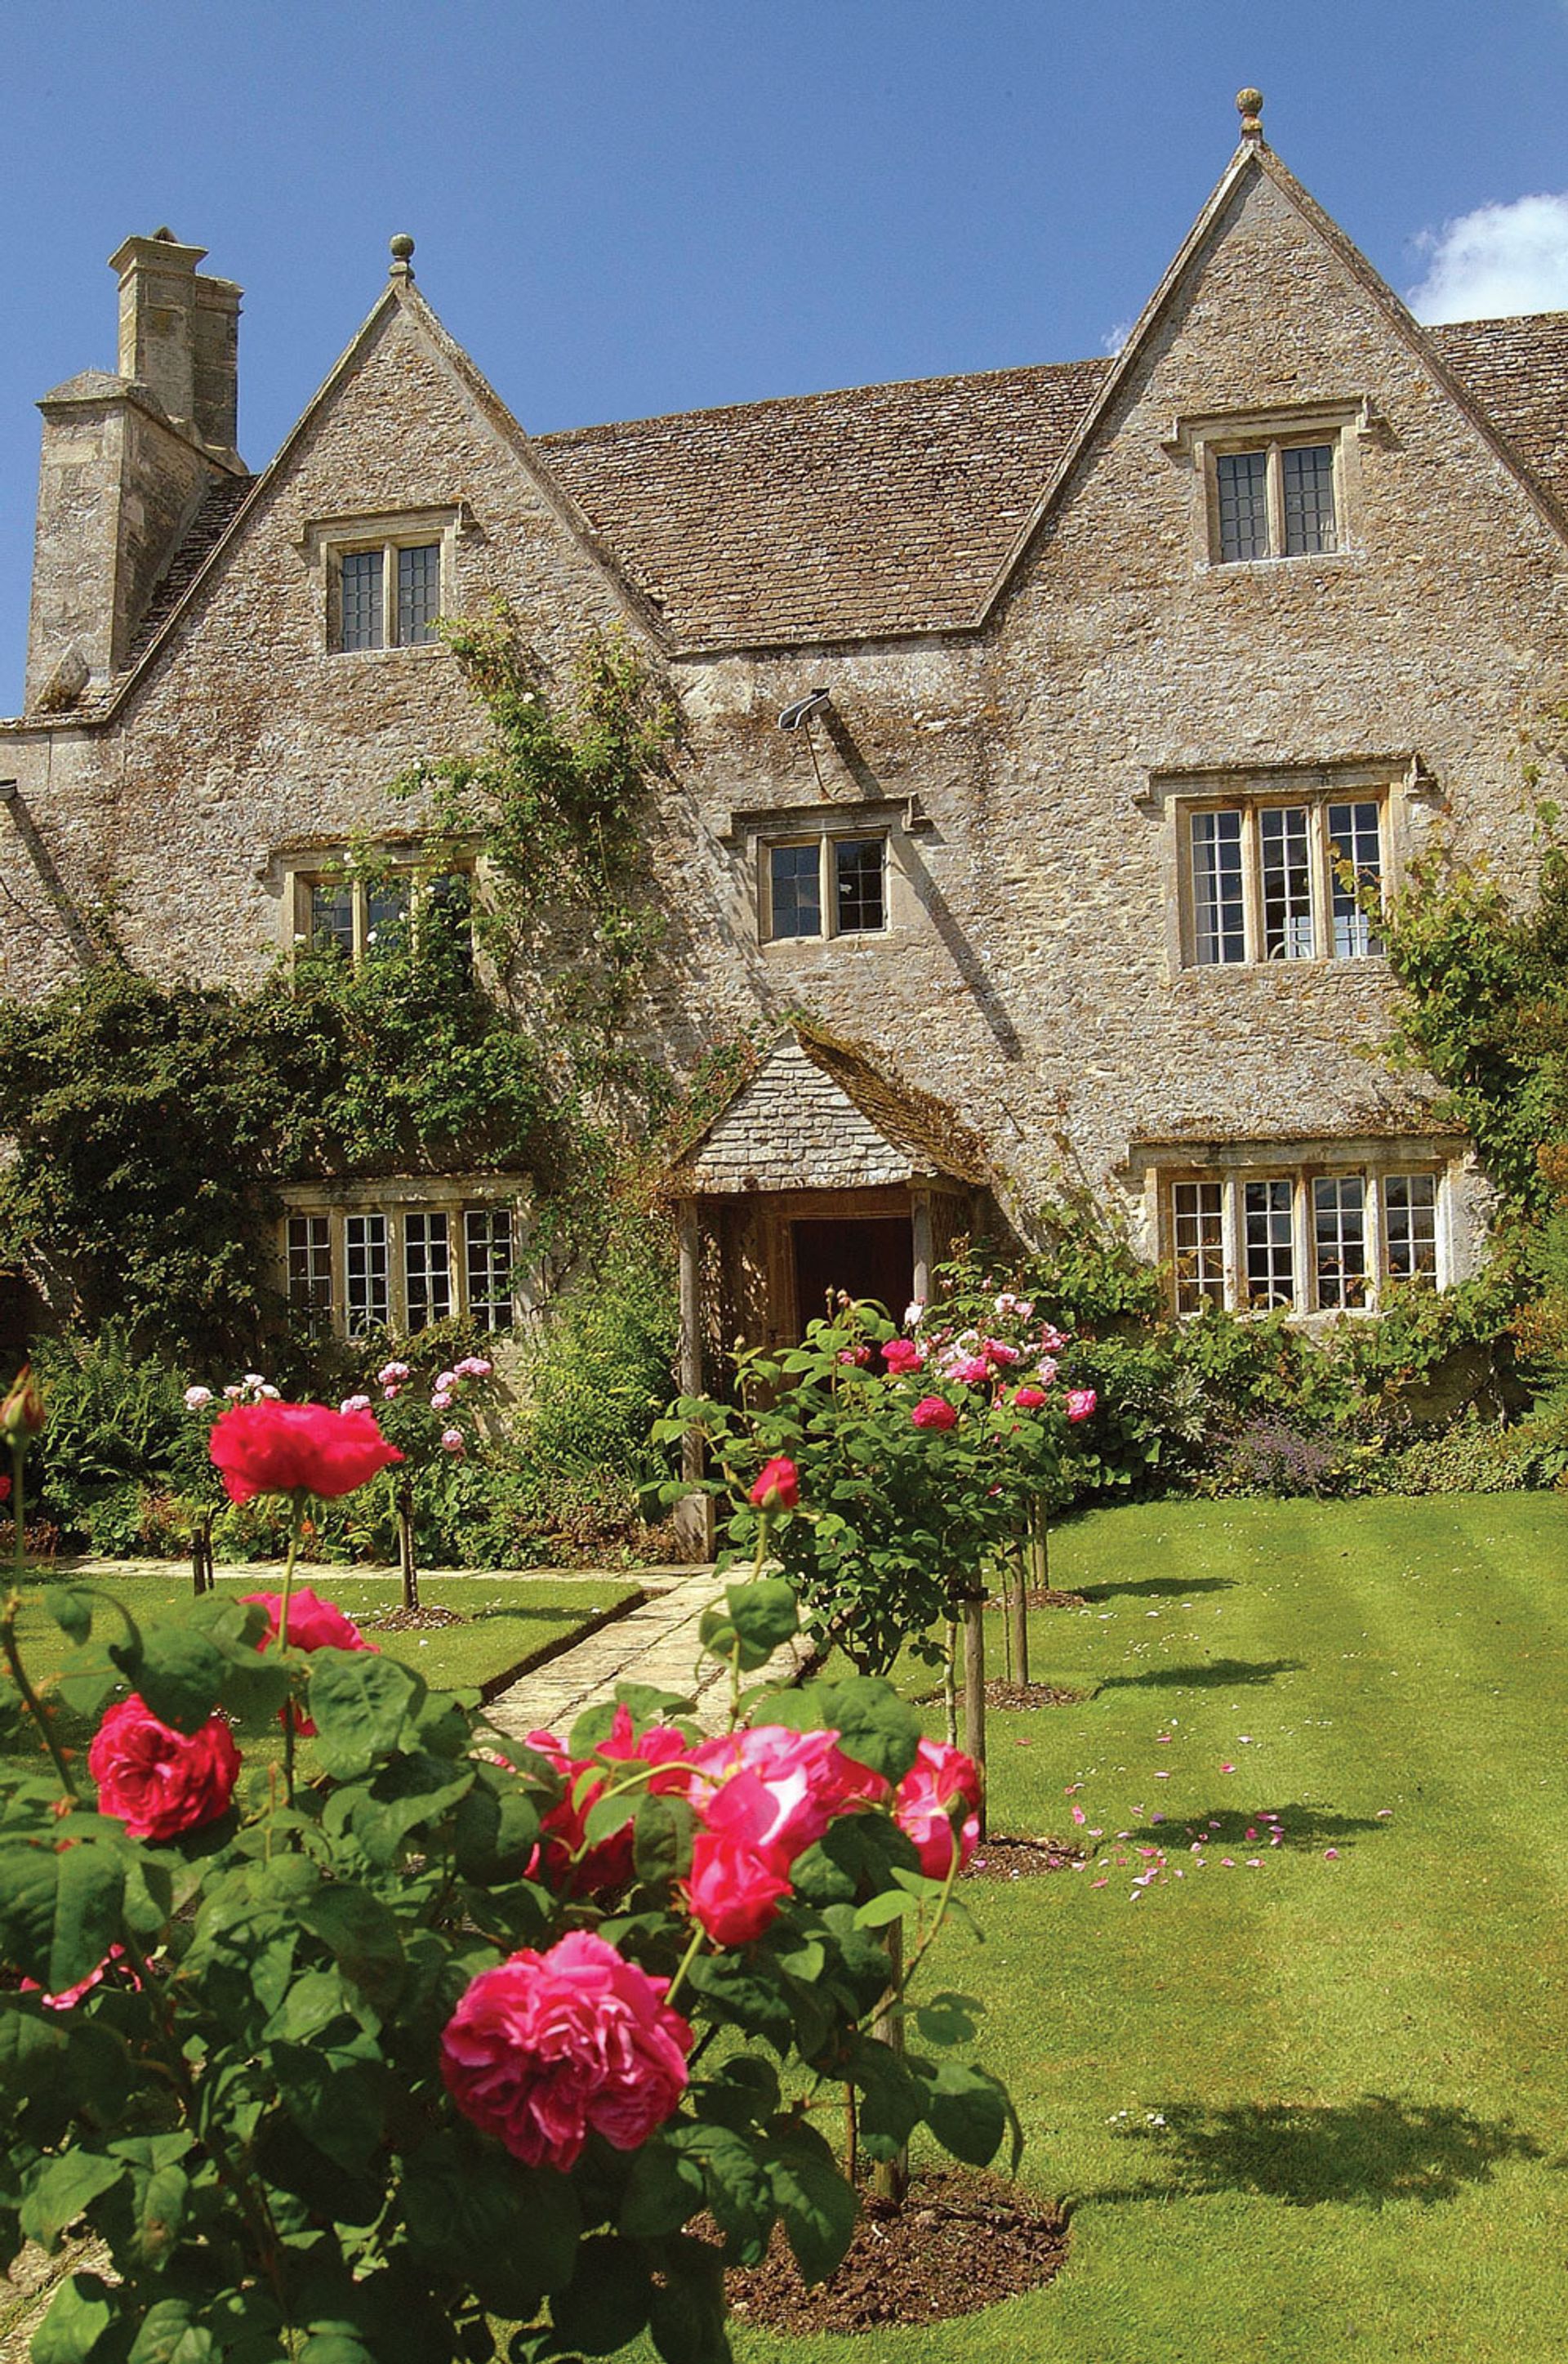 Kelmscott Manor in Oxfordshire, which William Morris leased with the artist Dante Gabriel Rossetti in 1871 Photo: © Society of Antiquaries of London